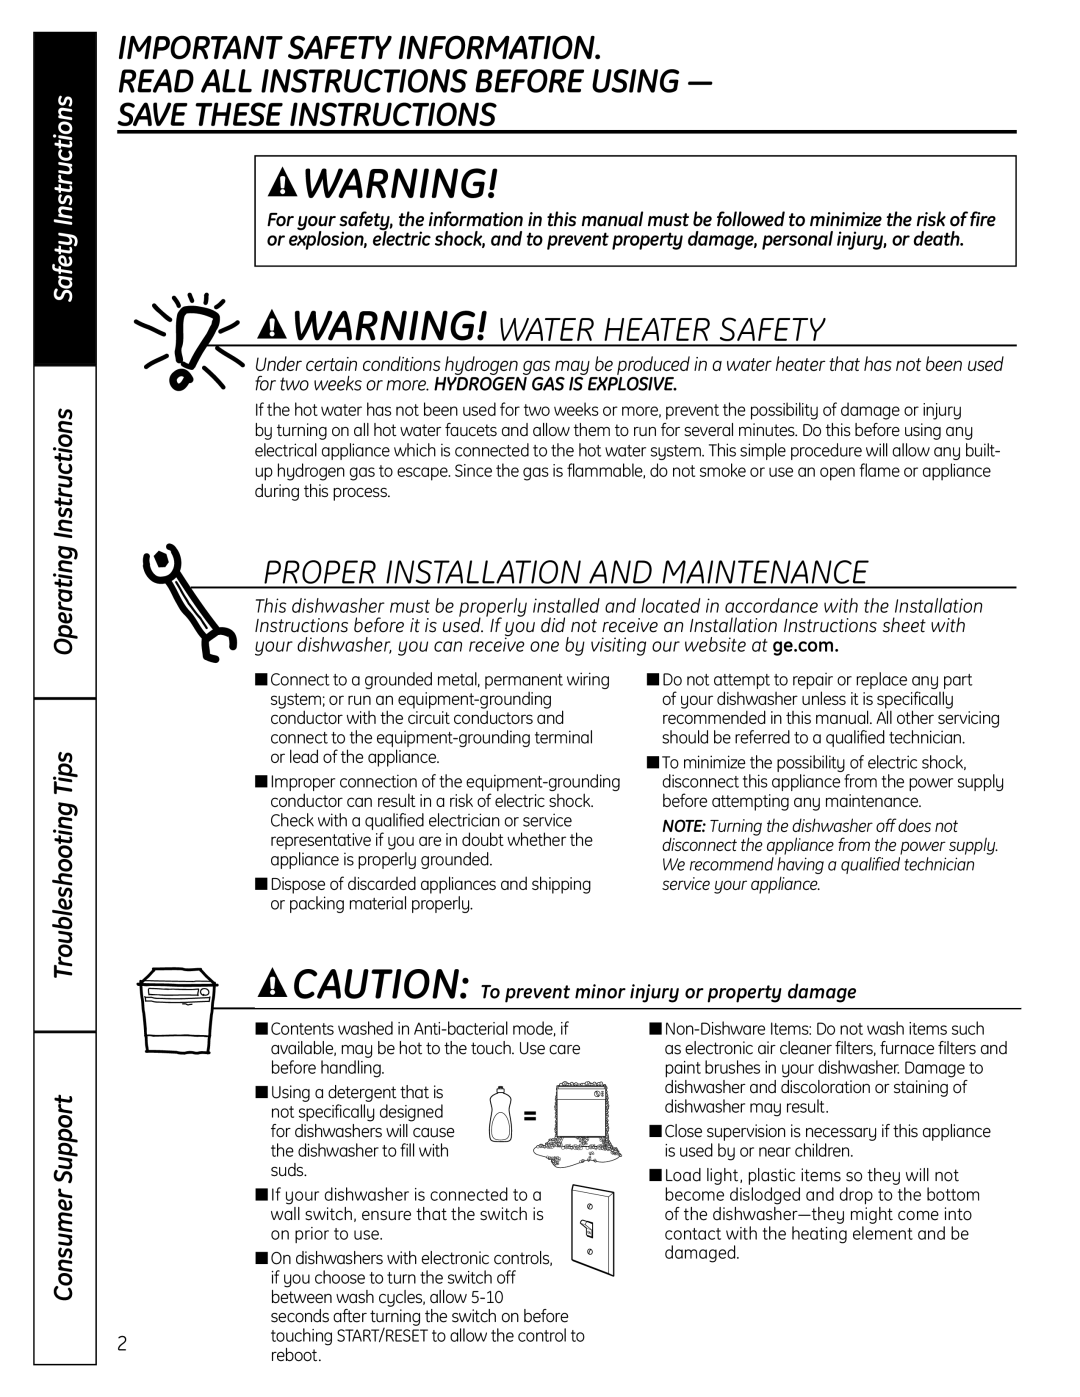 GE GLD6000 Important Safety Information Read All Instructions Before Using, Save These Instructions, Safety Instructions 